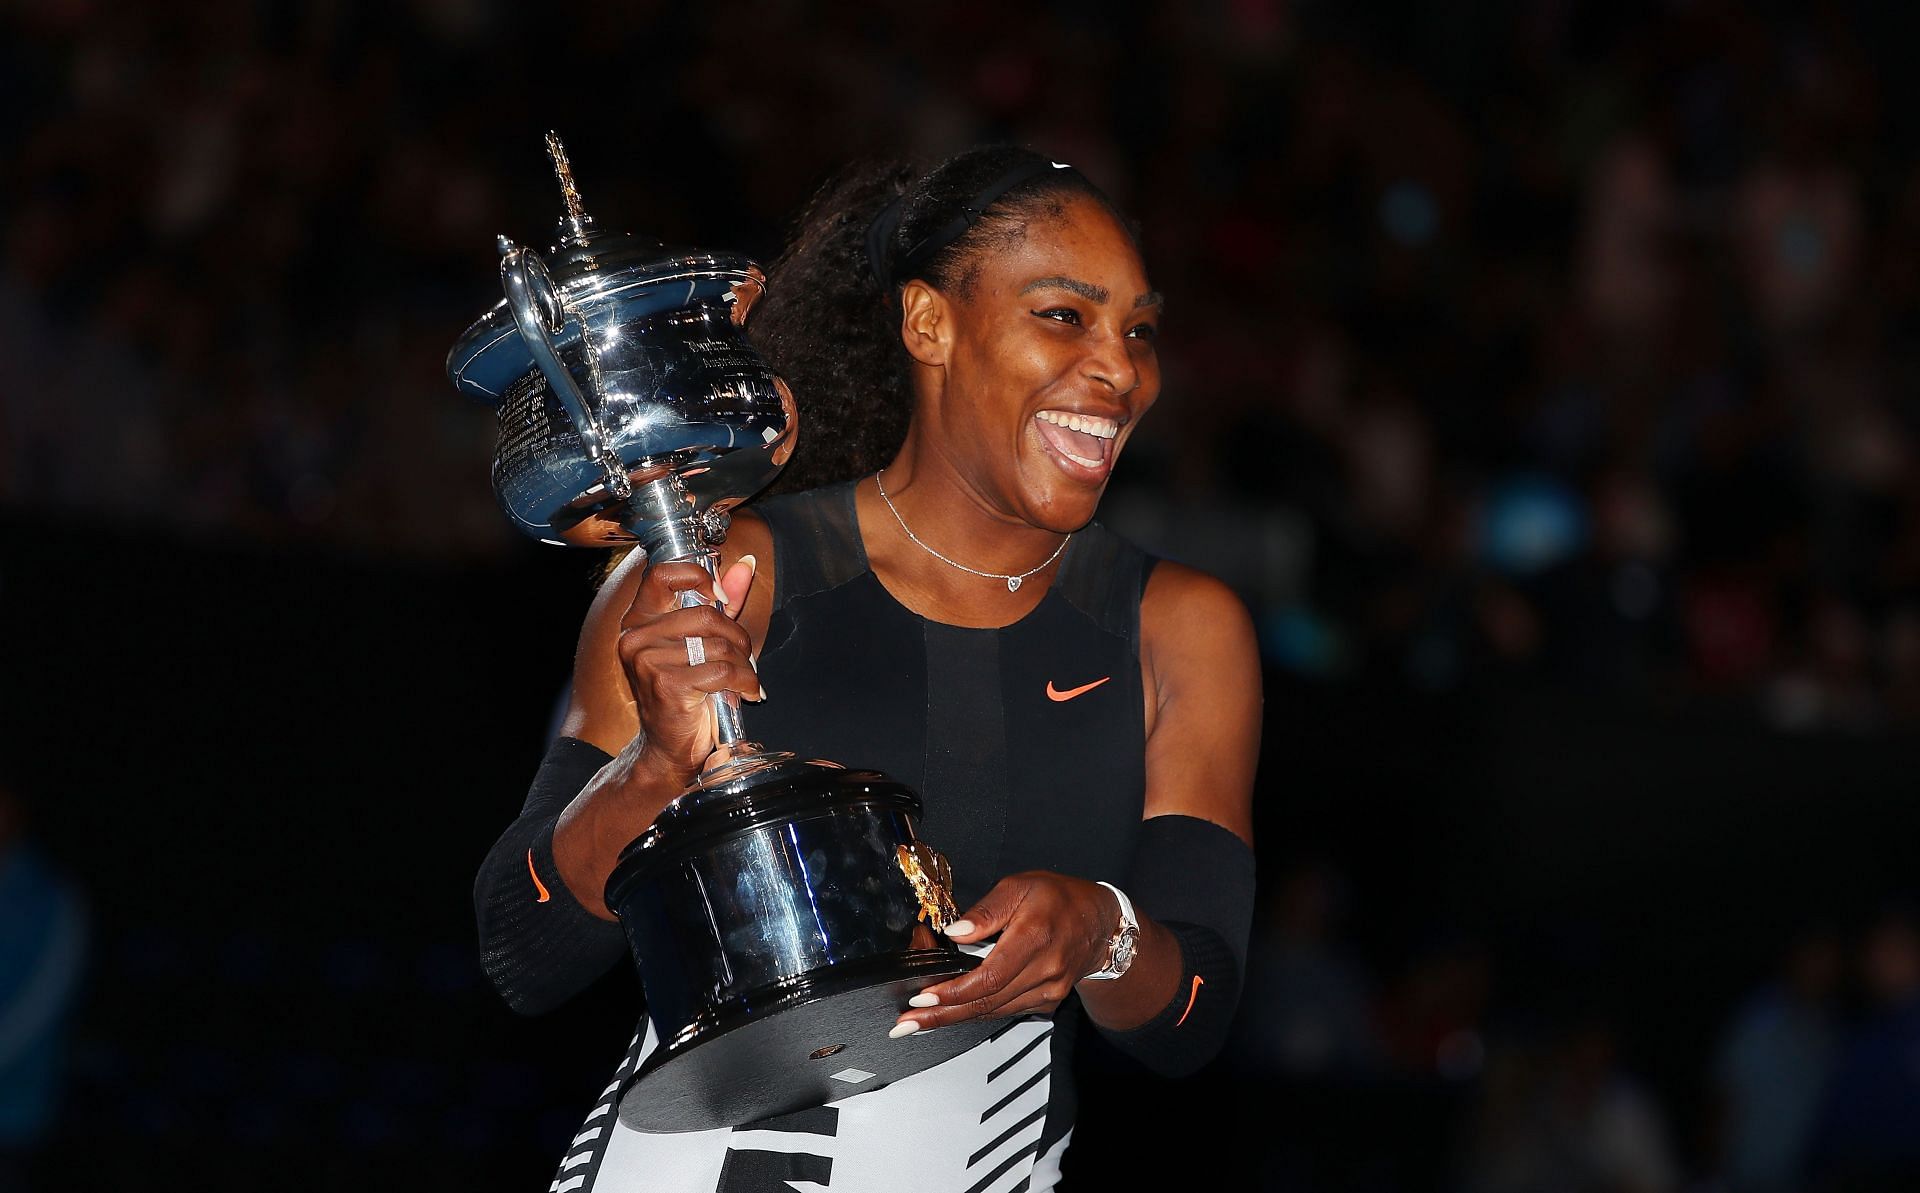 Serena Williams has held all four Grand Slams simultaneously not once but twice in her career